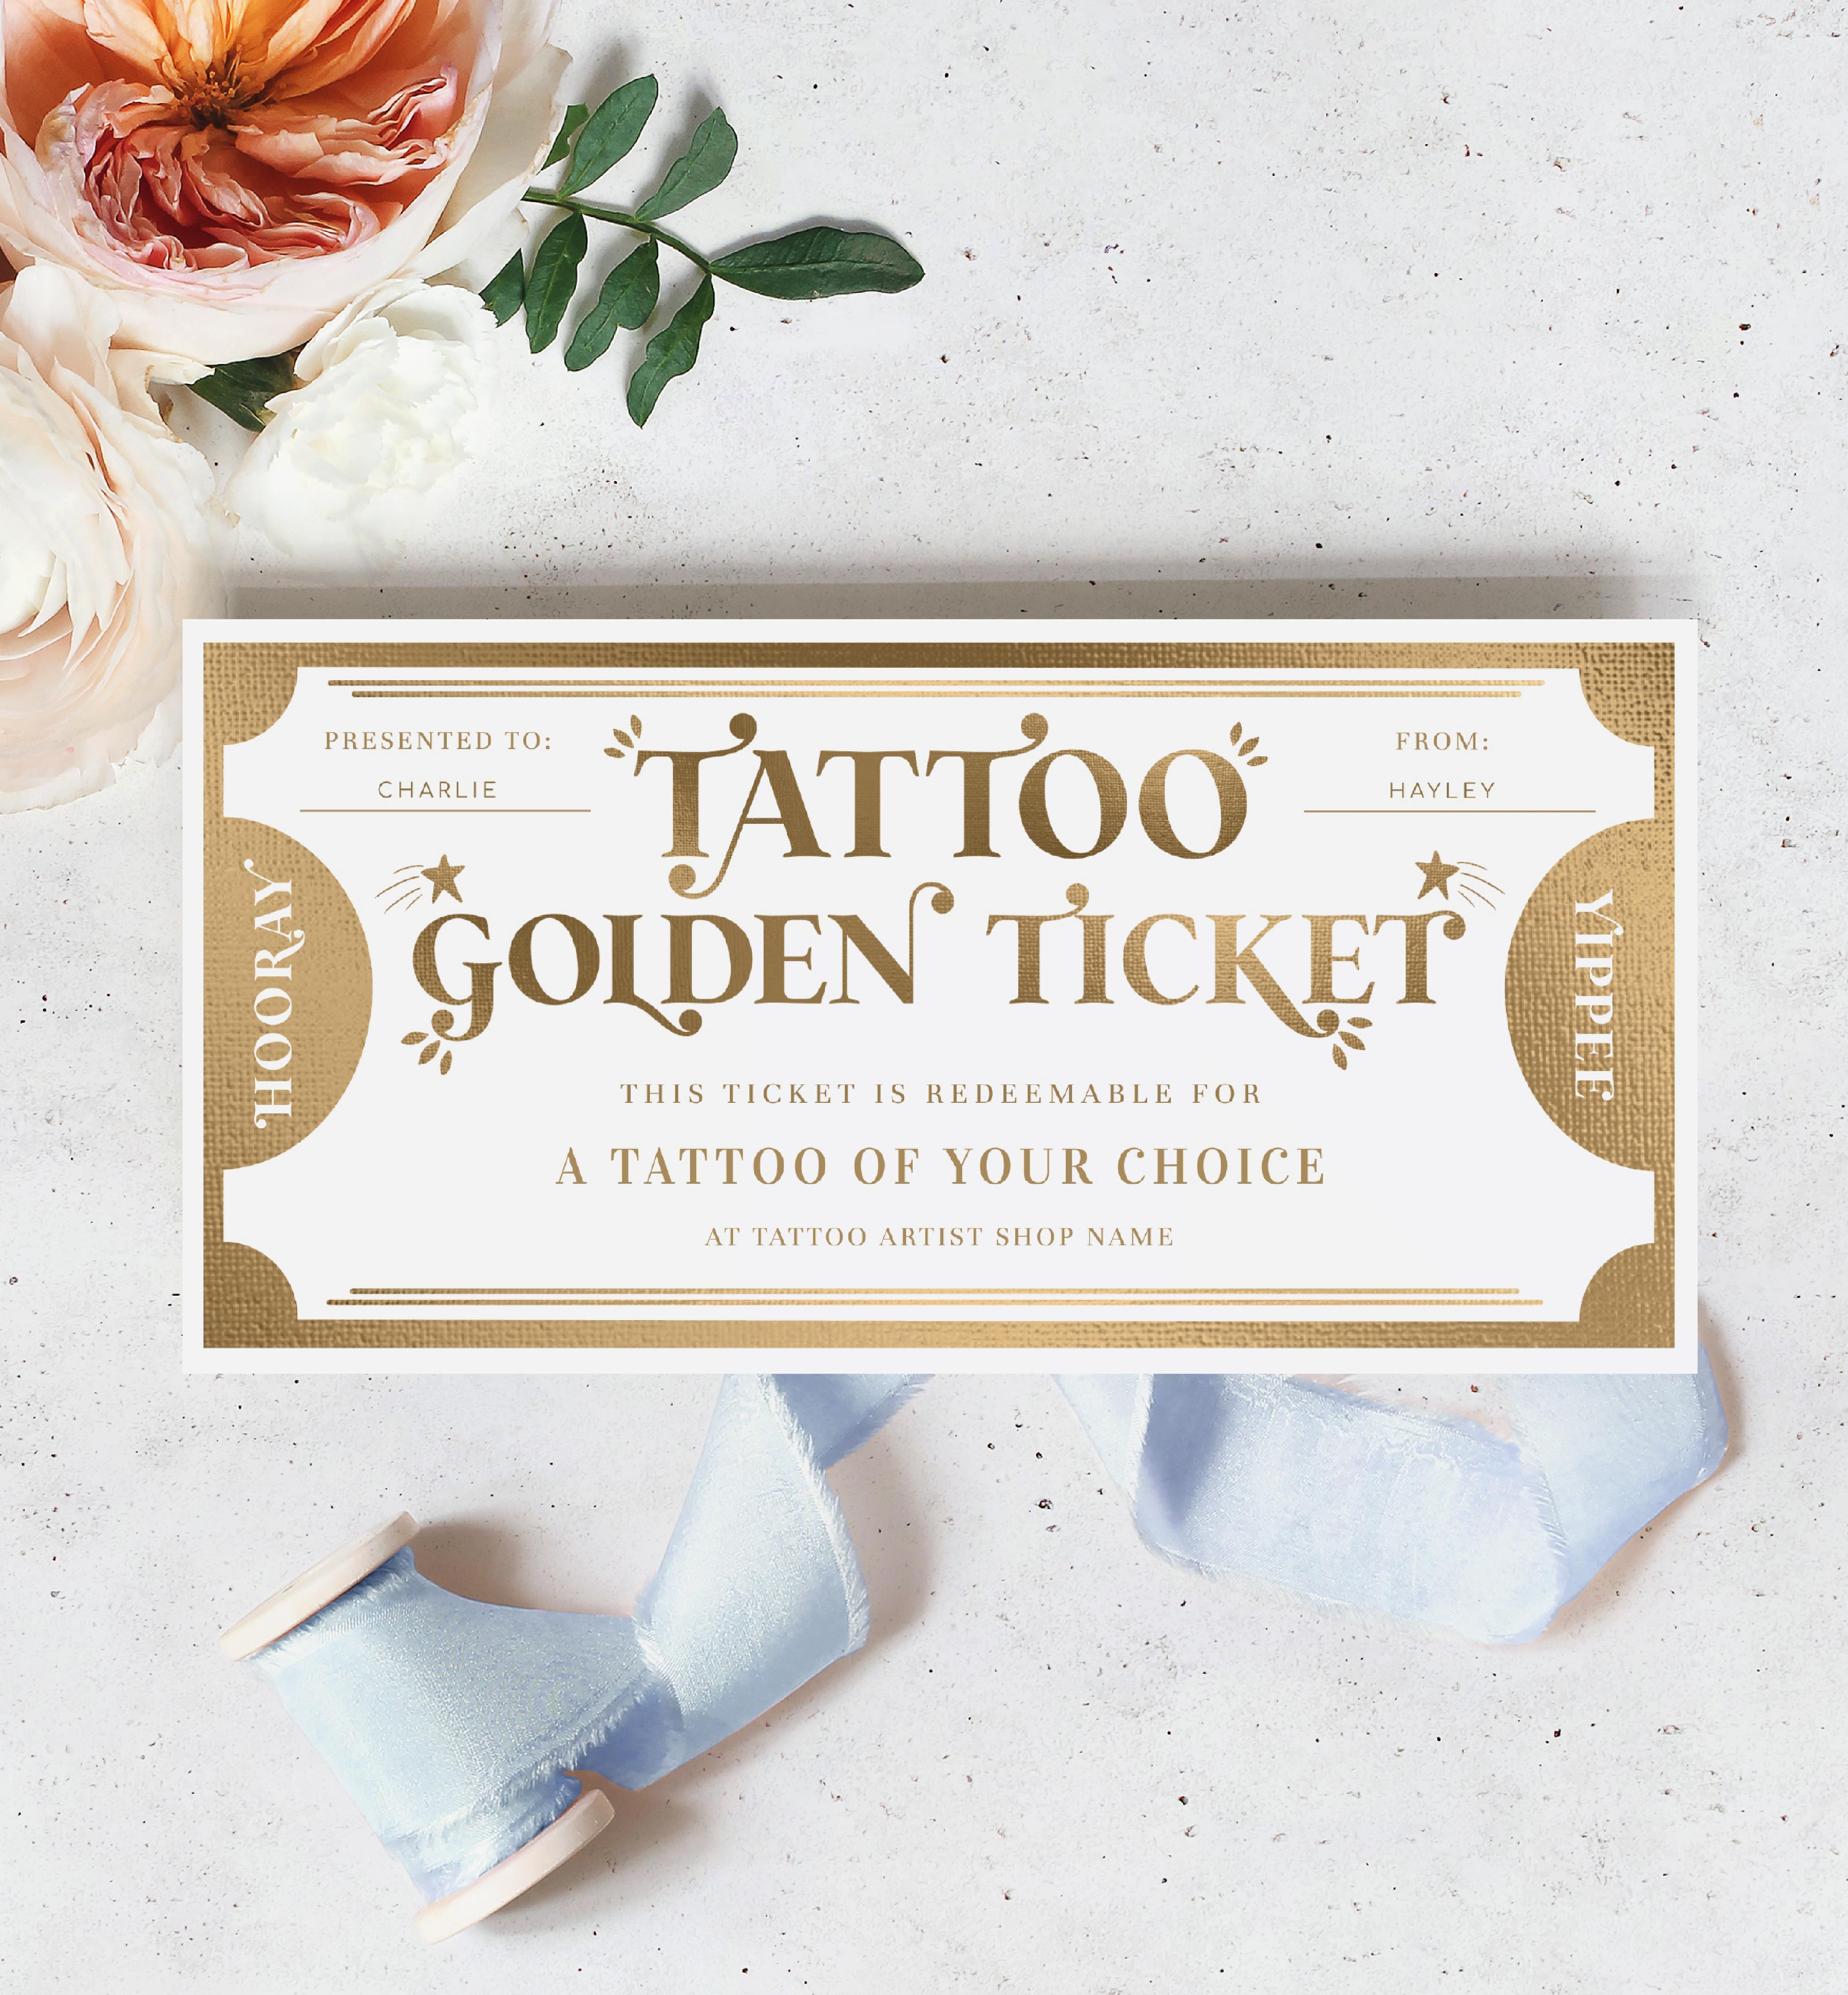 Secret Santa 2023: free voucher for any tattoo of your choice at a renowned studio for your style.